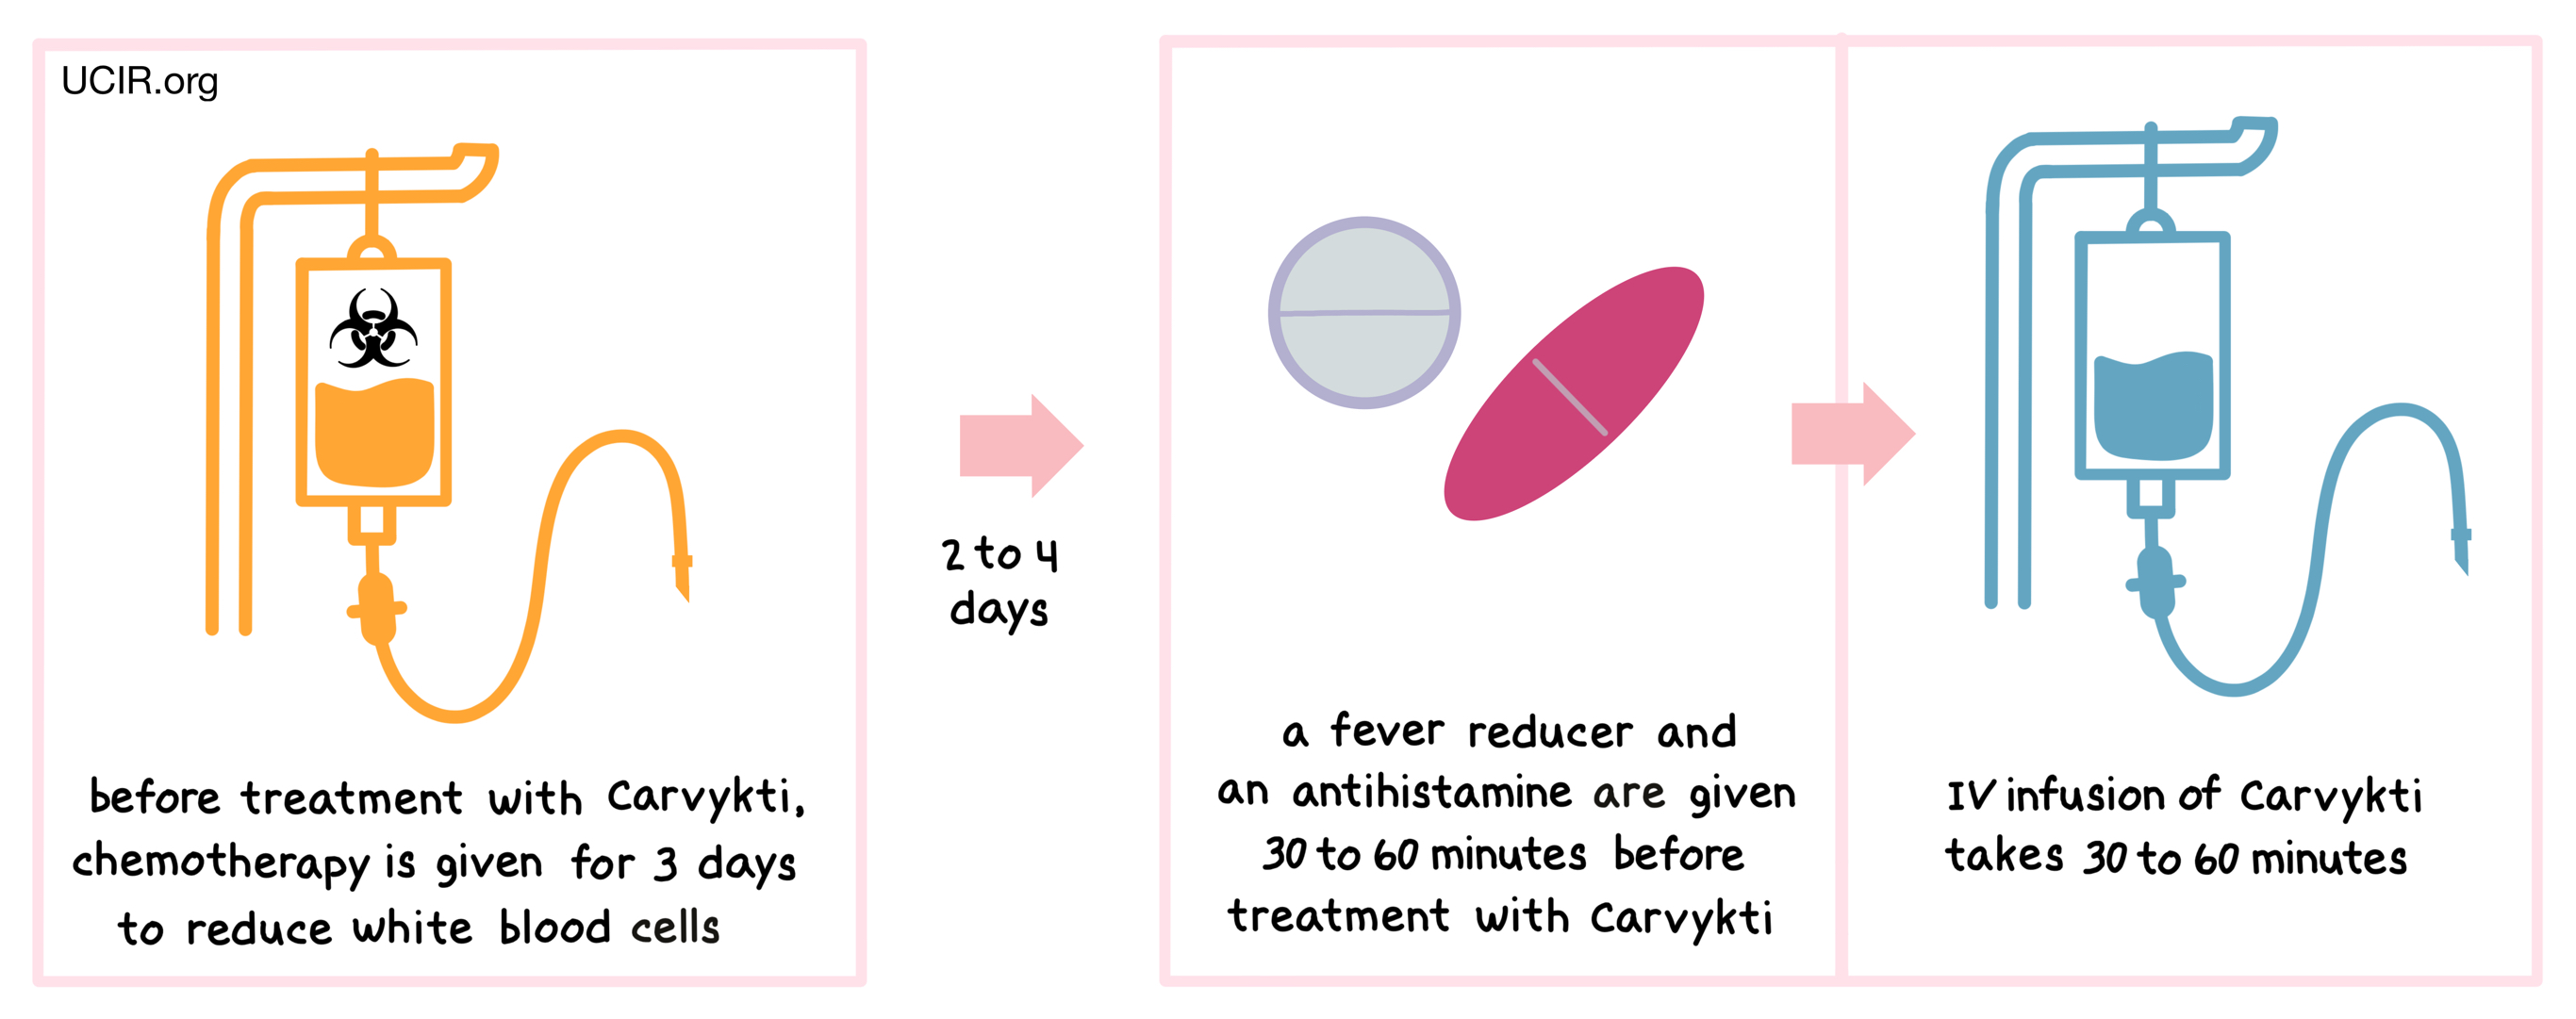 Illustration showing how Carvykti is administered to patients